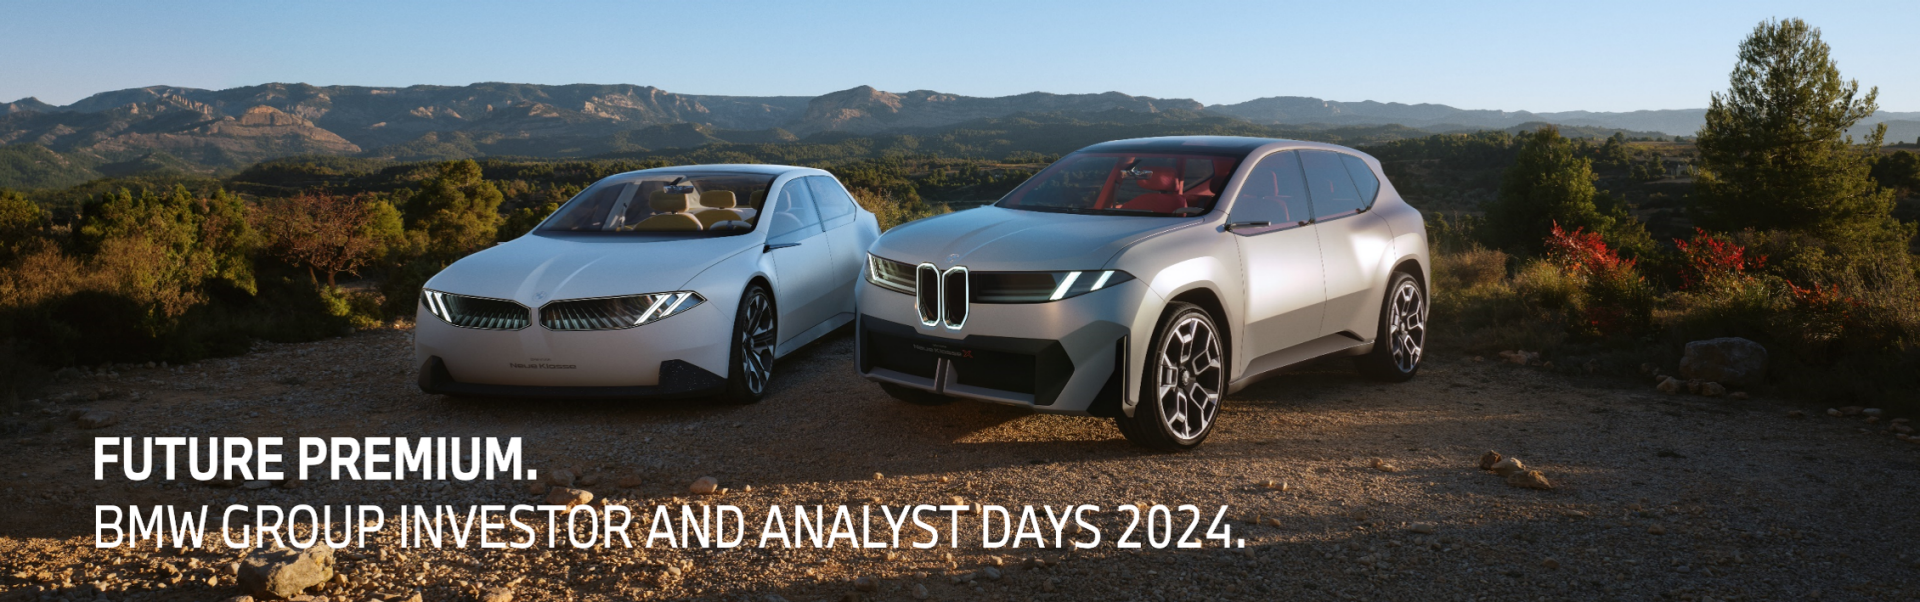 Visual BMW Group Investor and Analyst Days 2024.